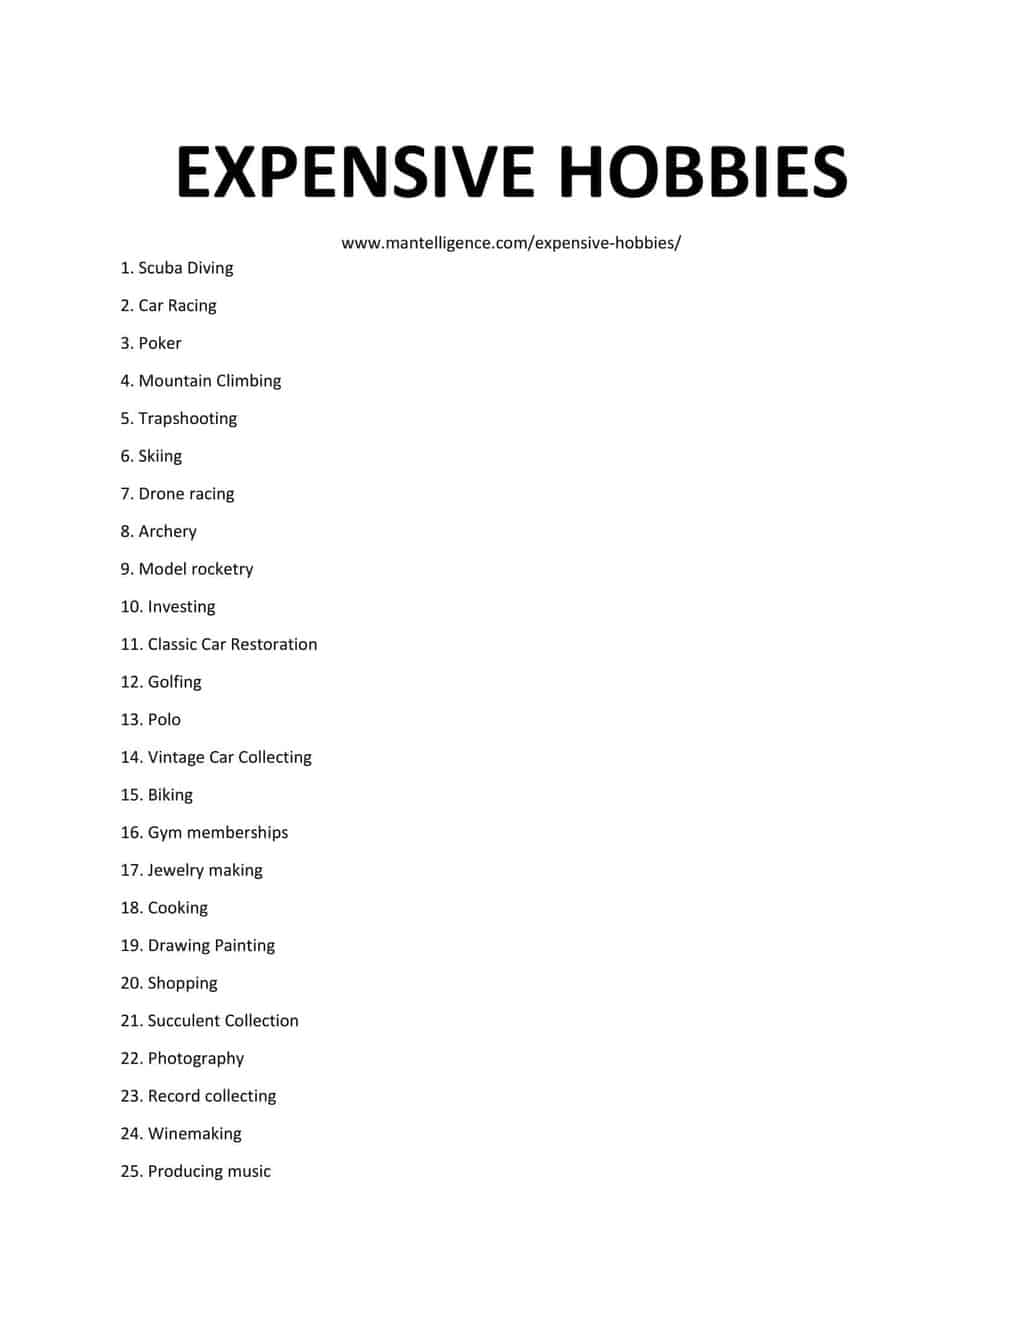 Downloadable list of Expensive Hobbies